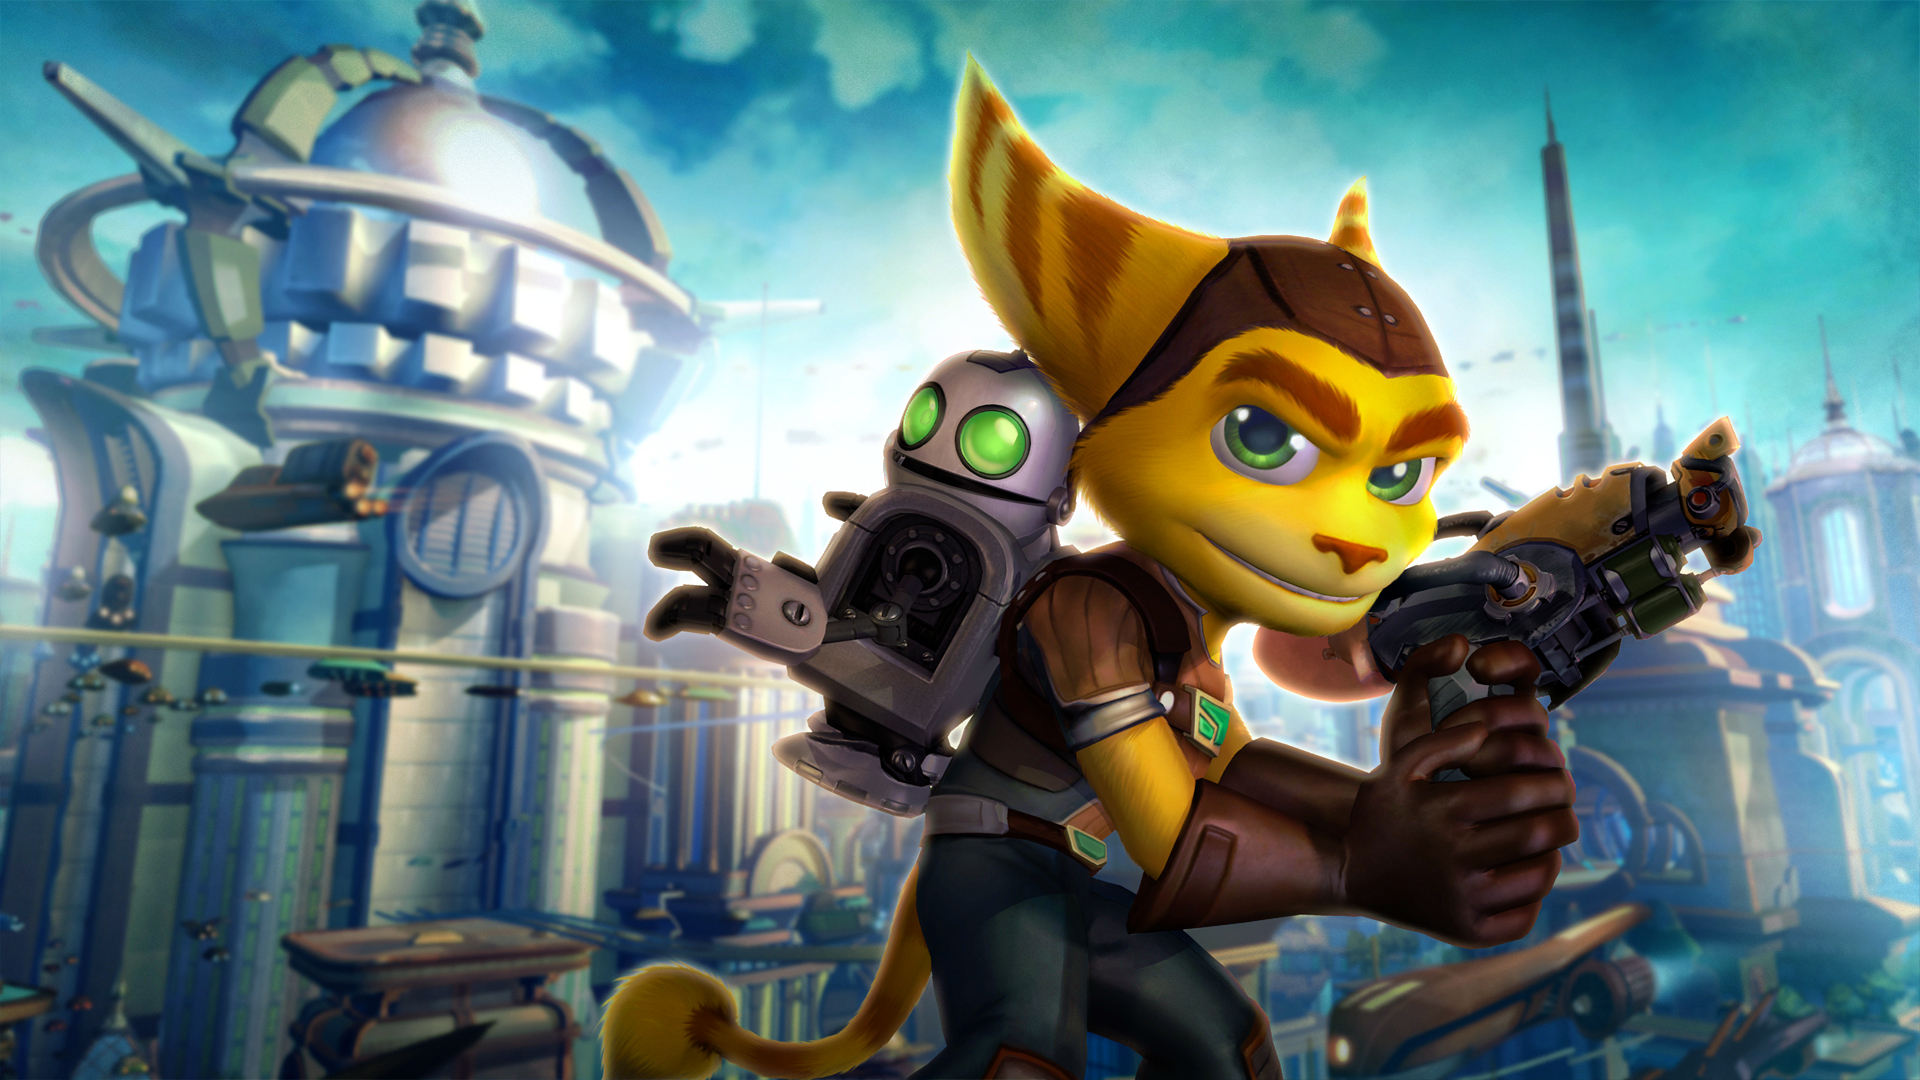 real ages of video game characters - Ratchet and Clank